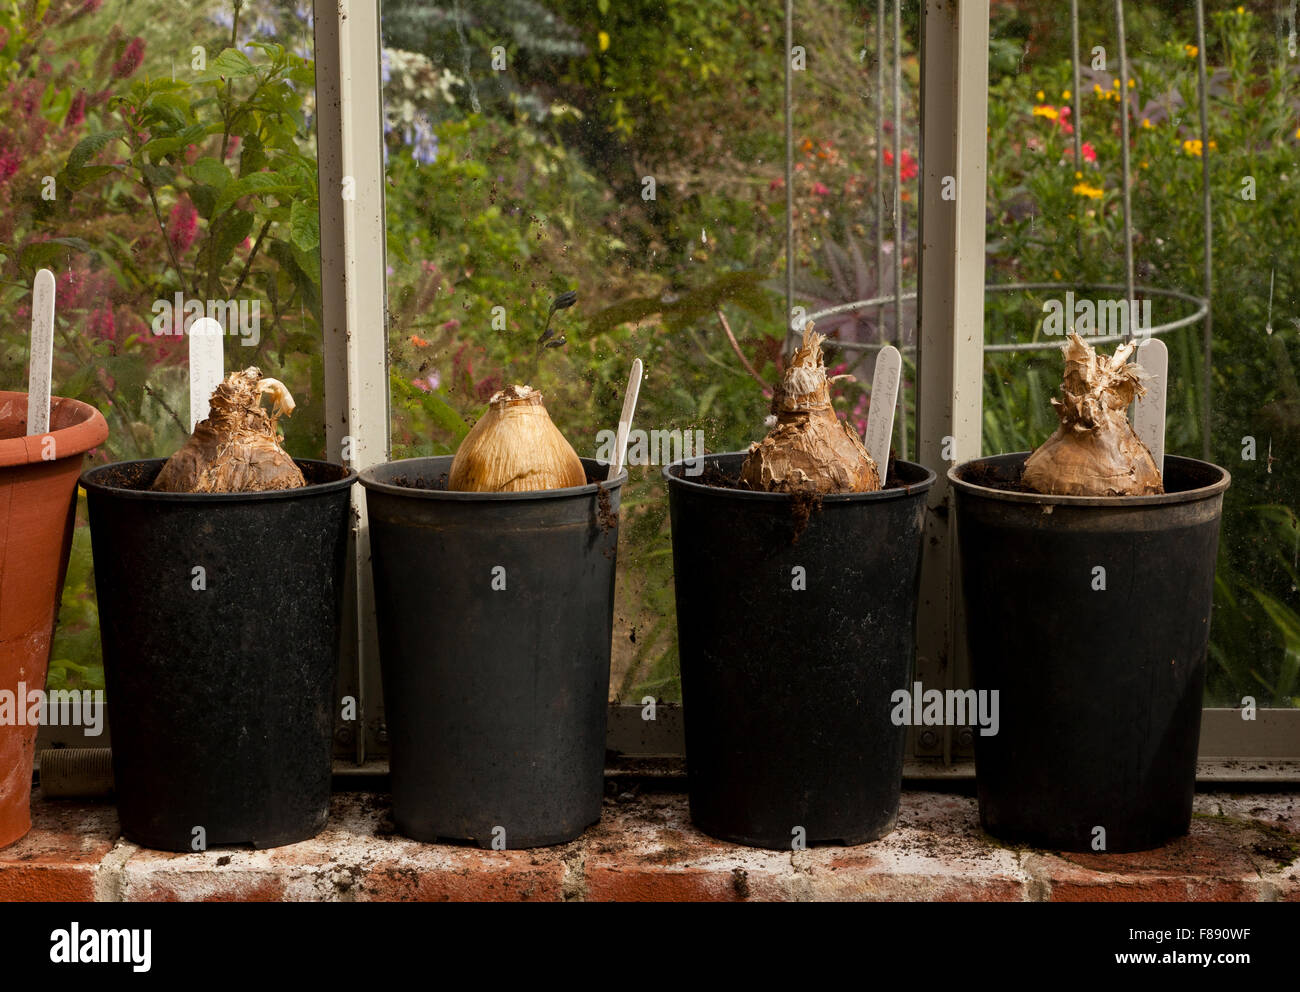 Four Amaryllis bulbs in pots in a greenhouse Stock Photo